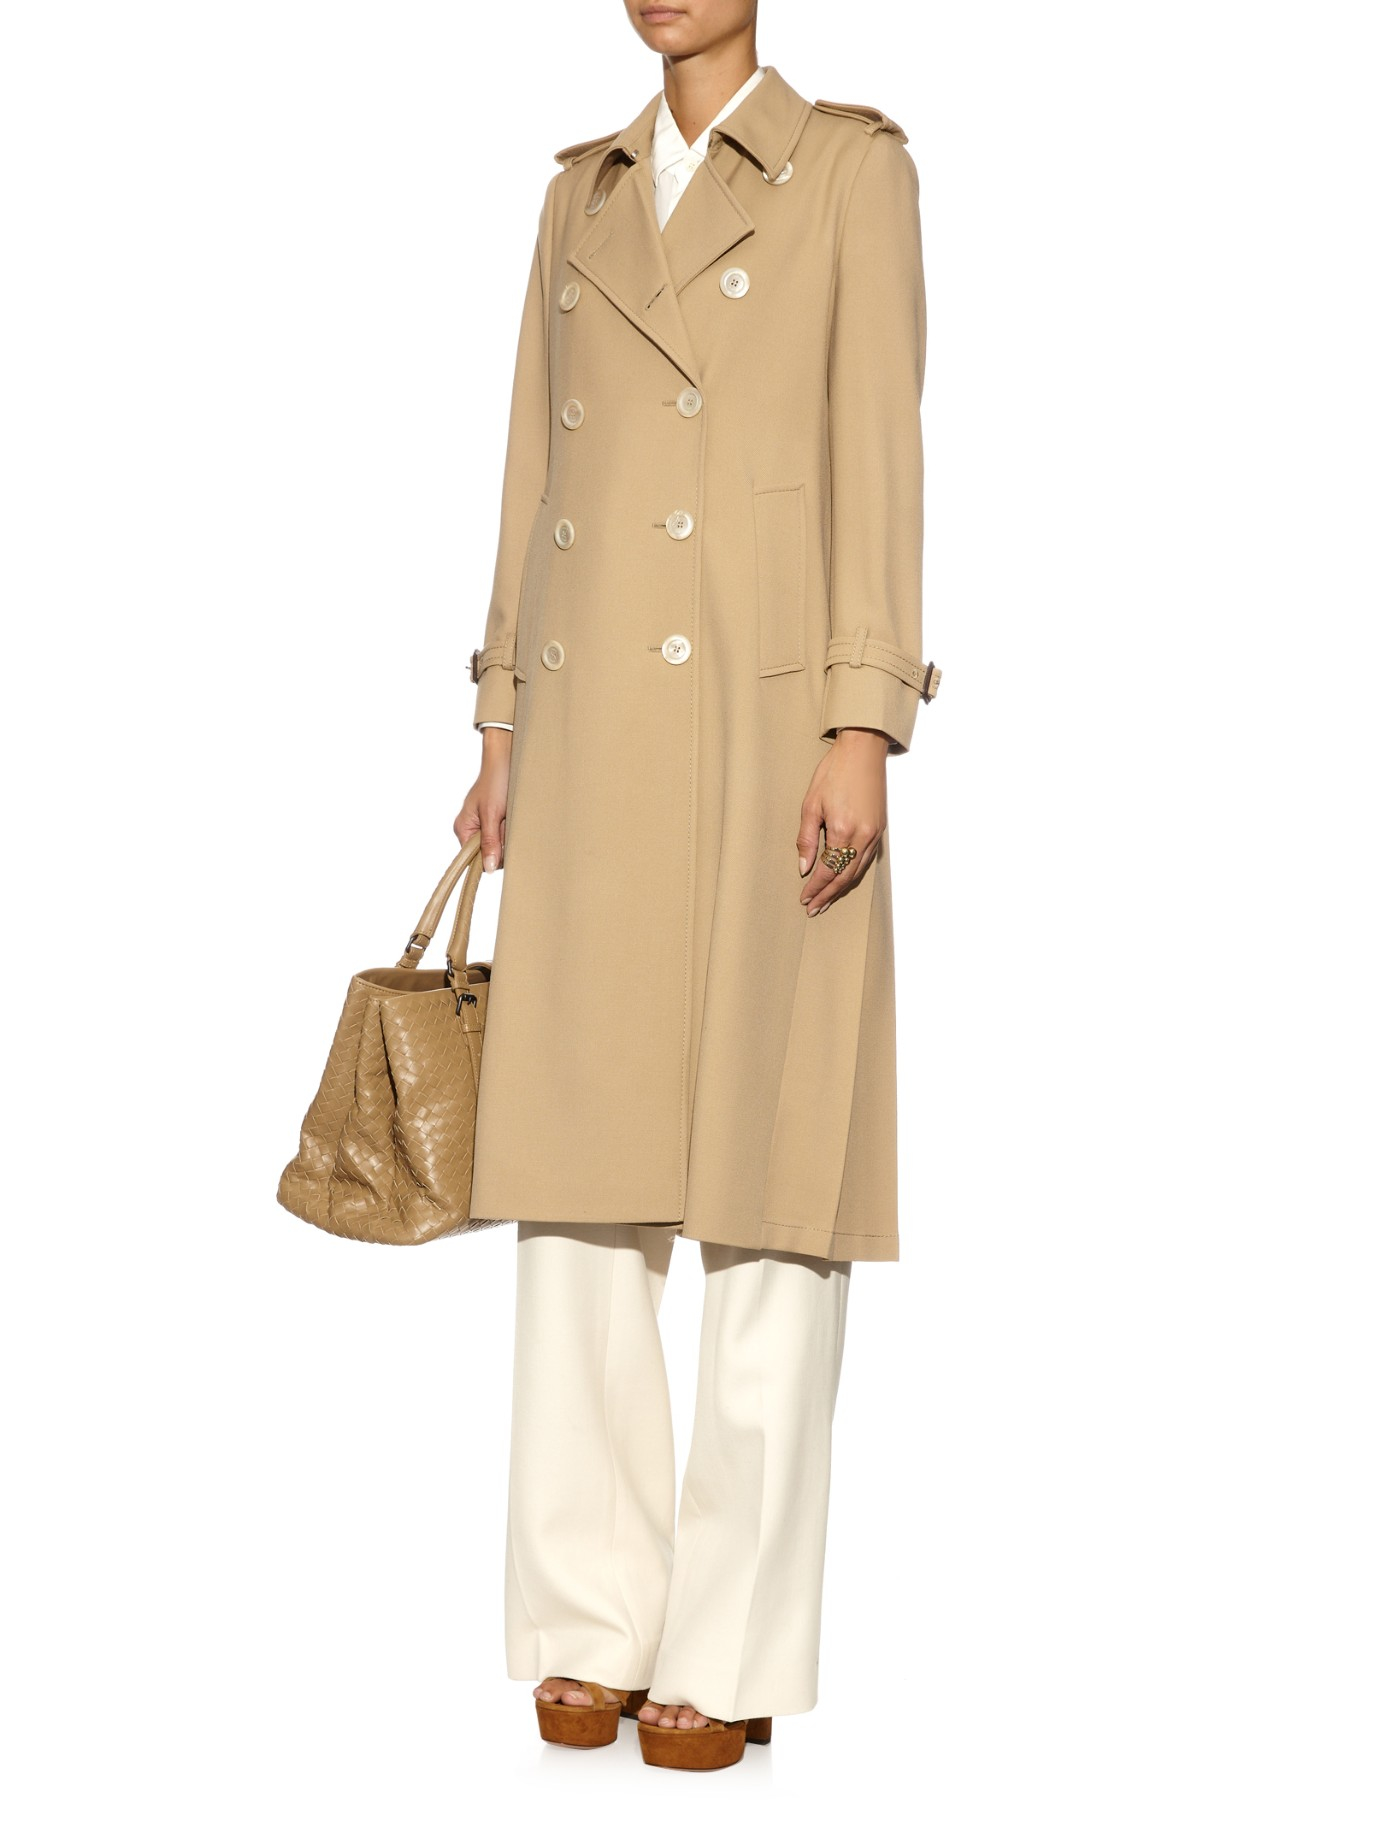 Lyst - Gucci Pleated Back Wool Trench Coat in Natural